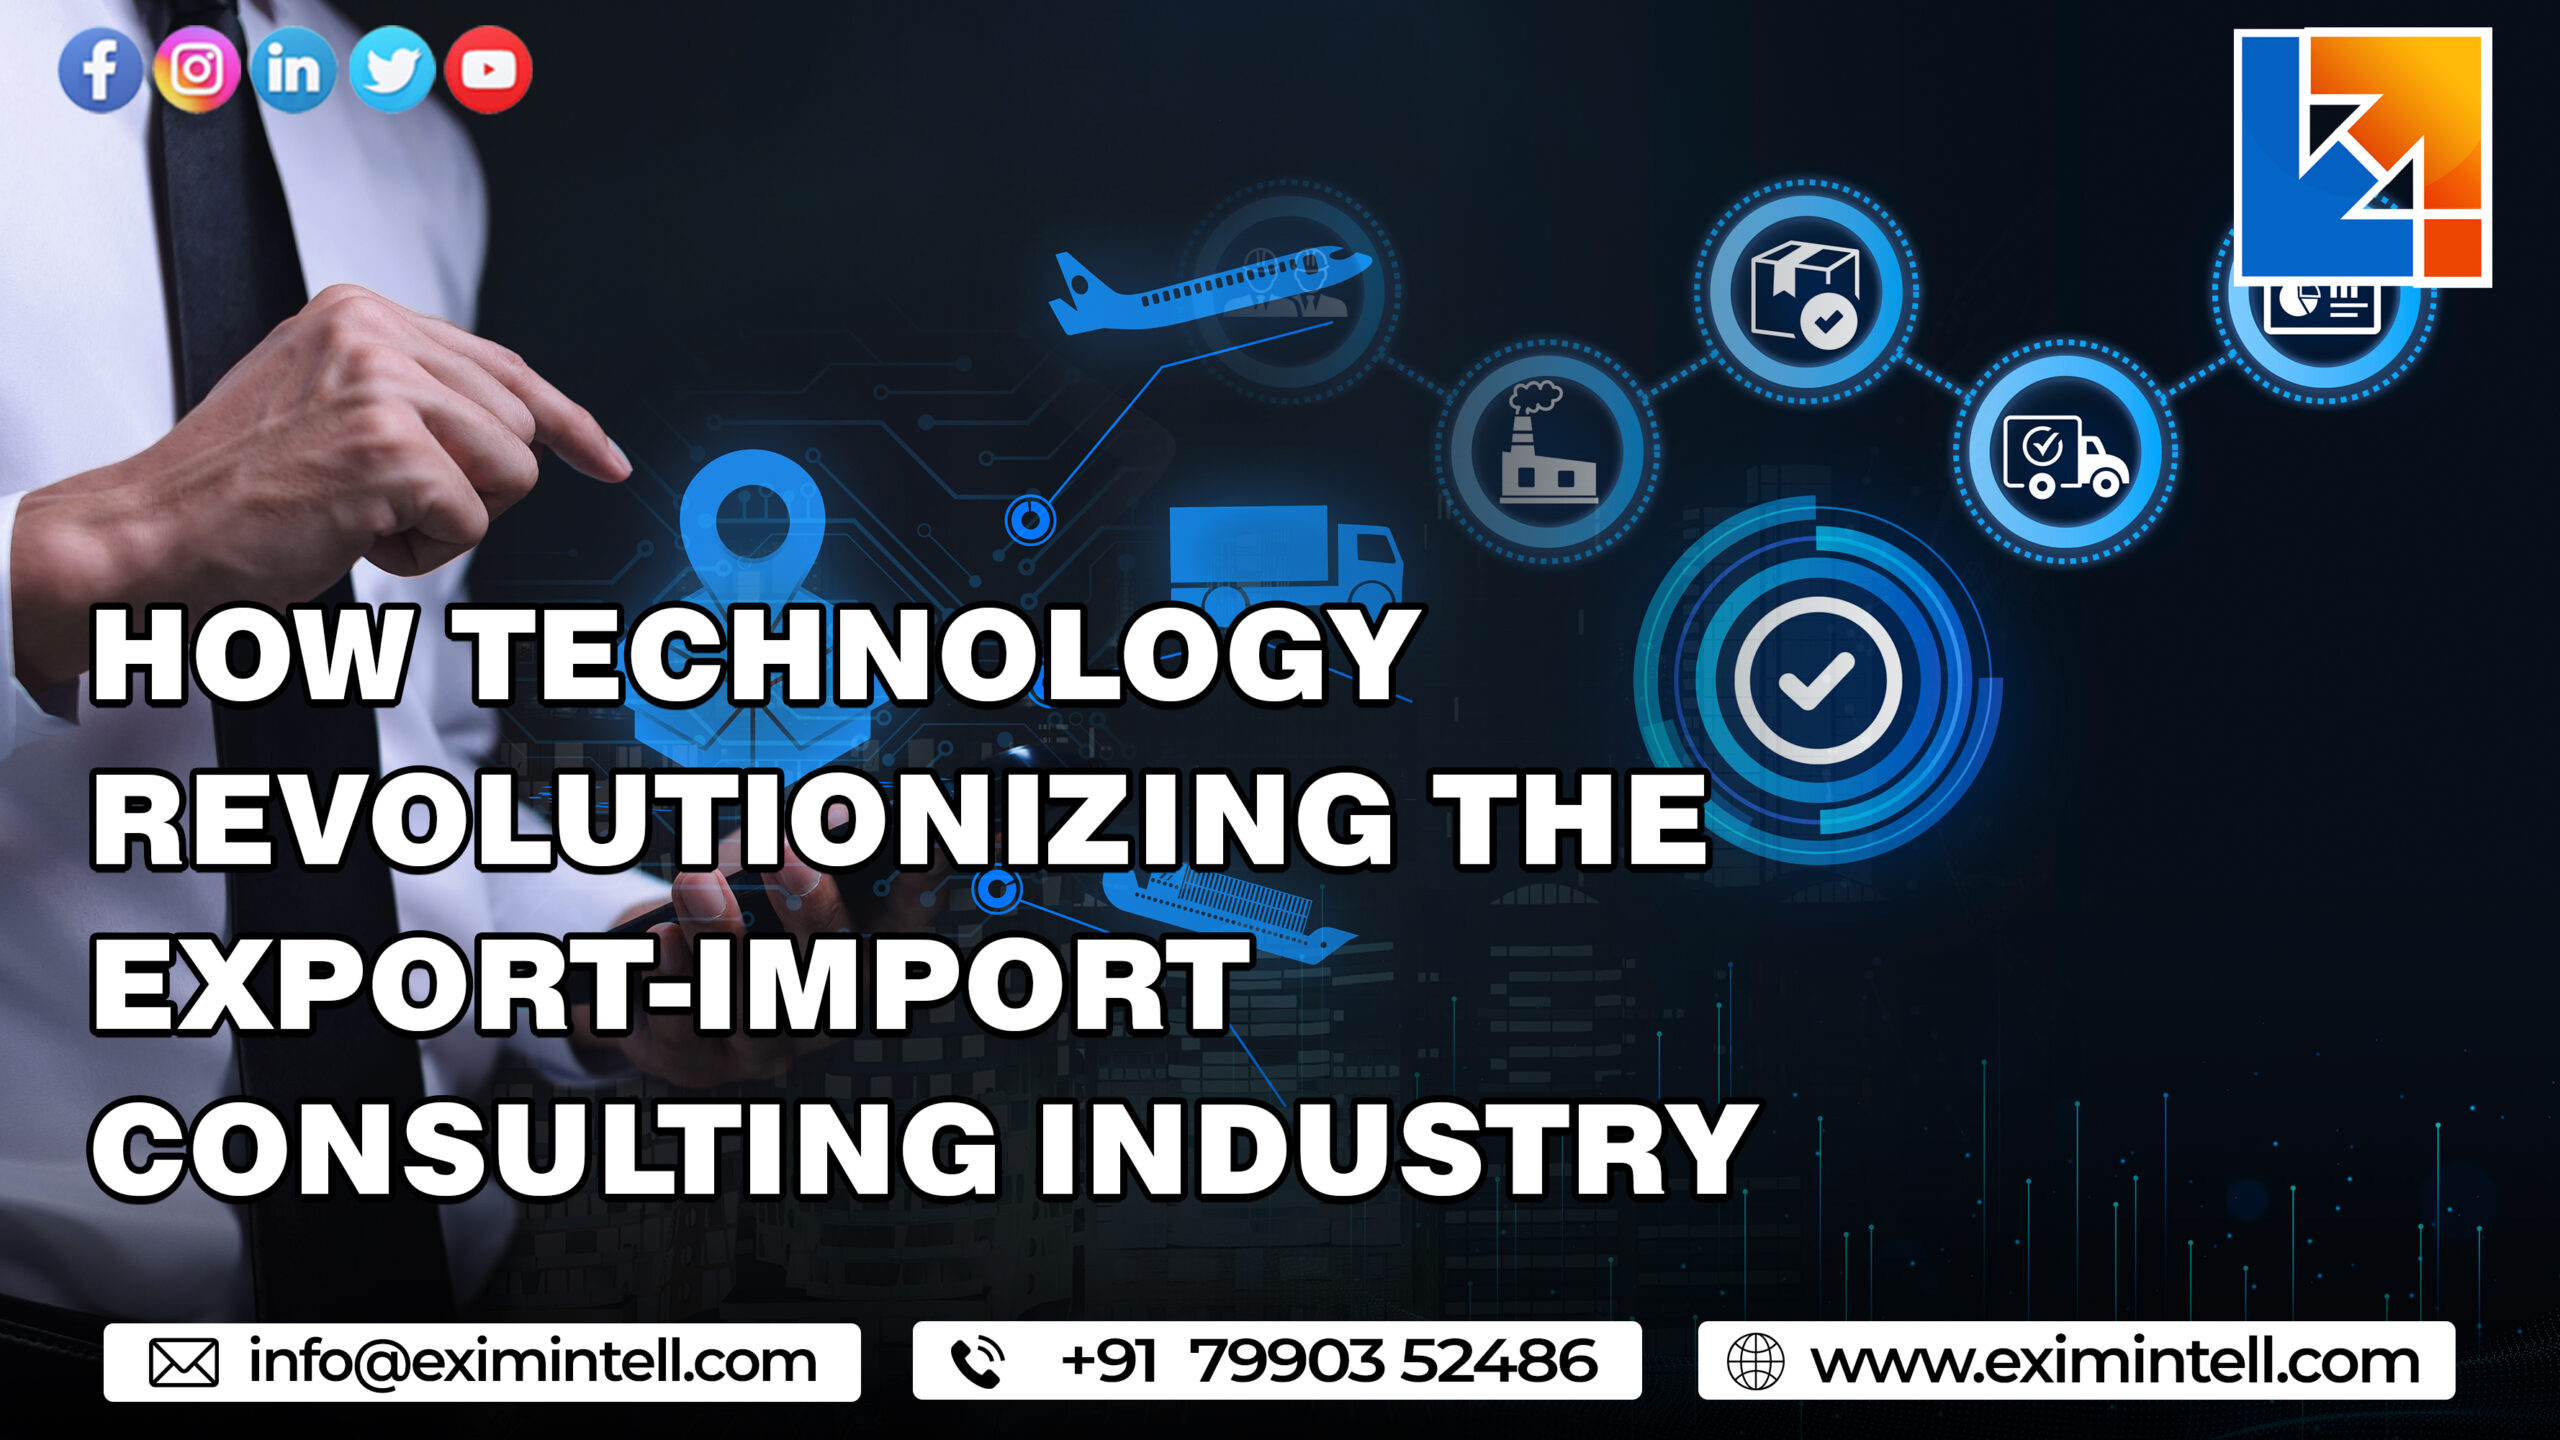 How Technology Revolutionizing the Export-Import Consulting Industry